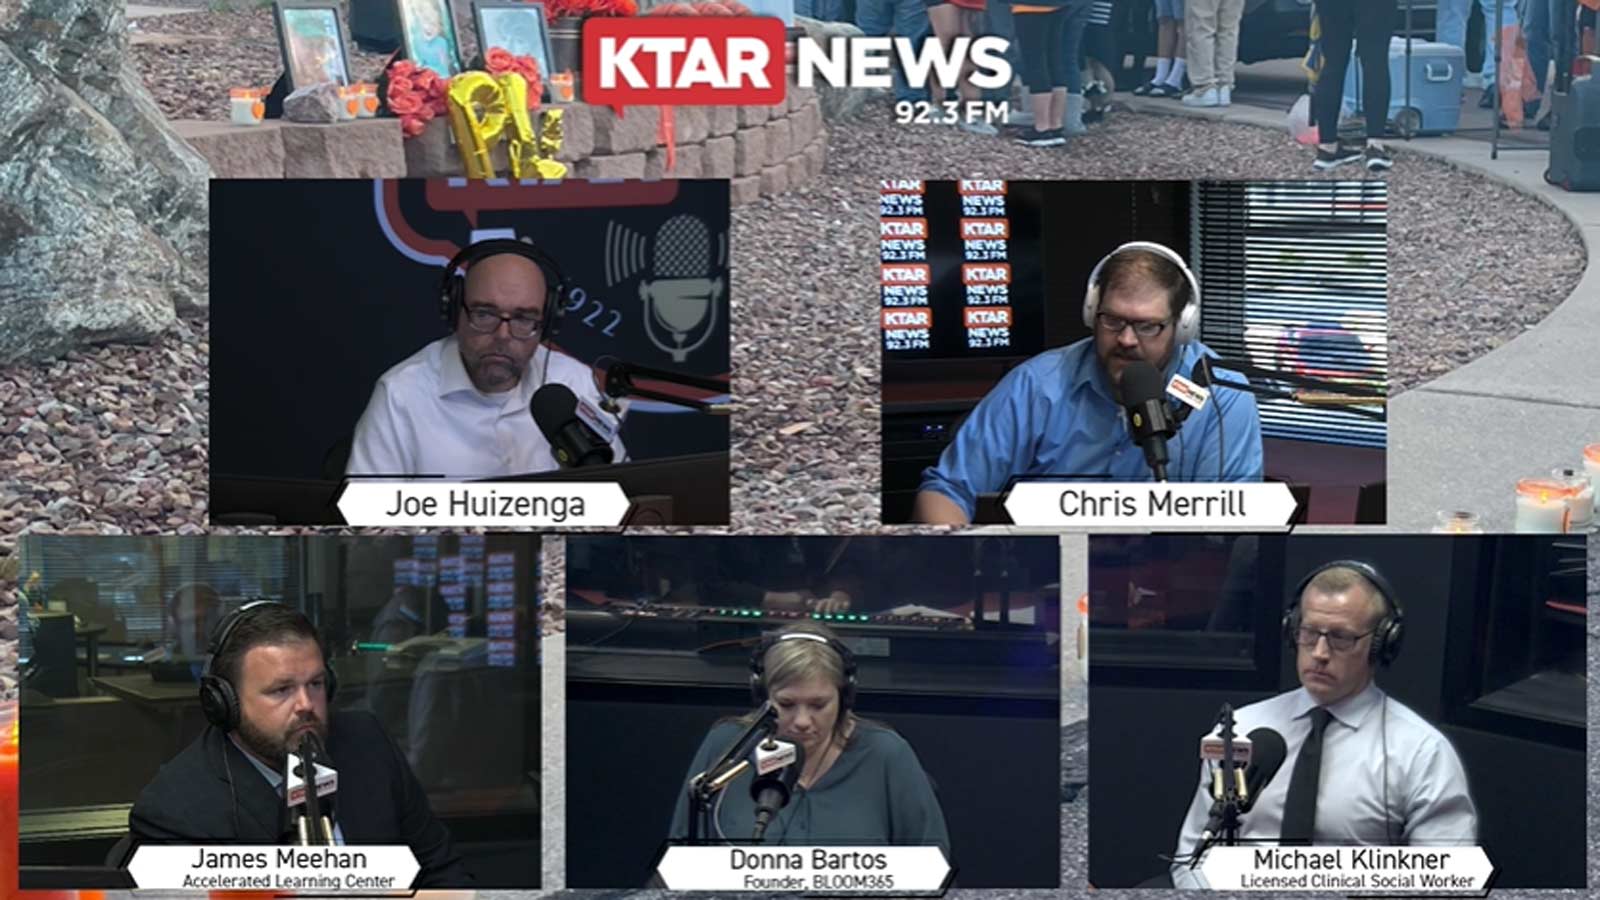 Watch replay of KTAR News 'Youth on Edge' roundtable on teen mental health, behavioral issues